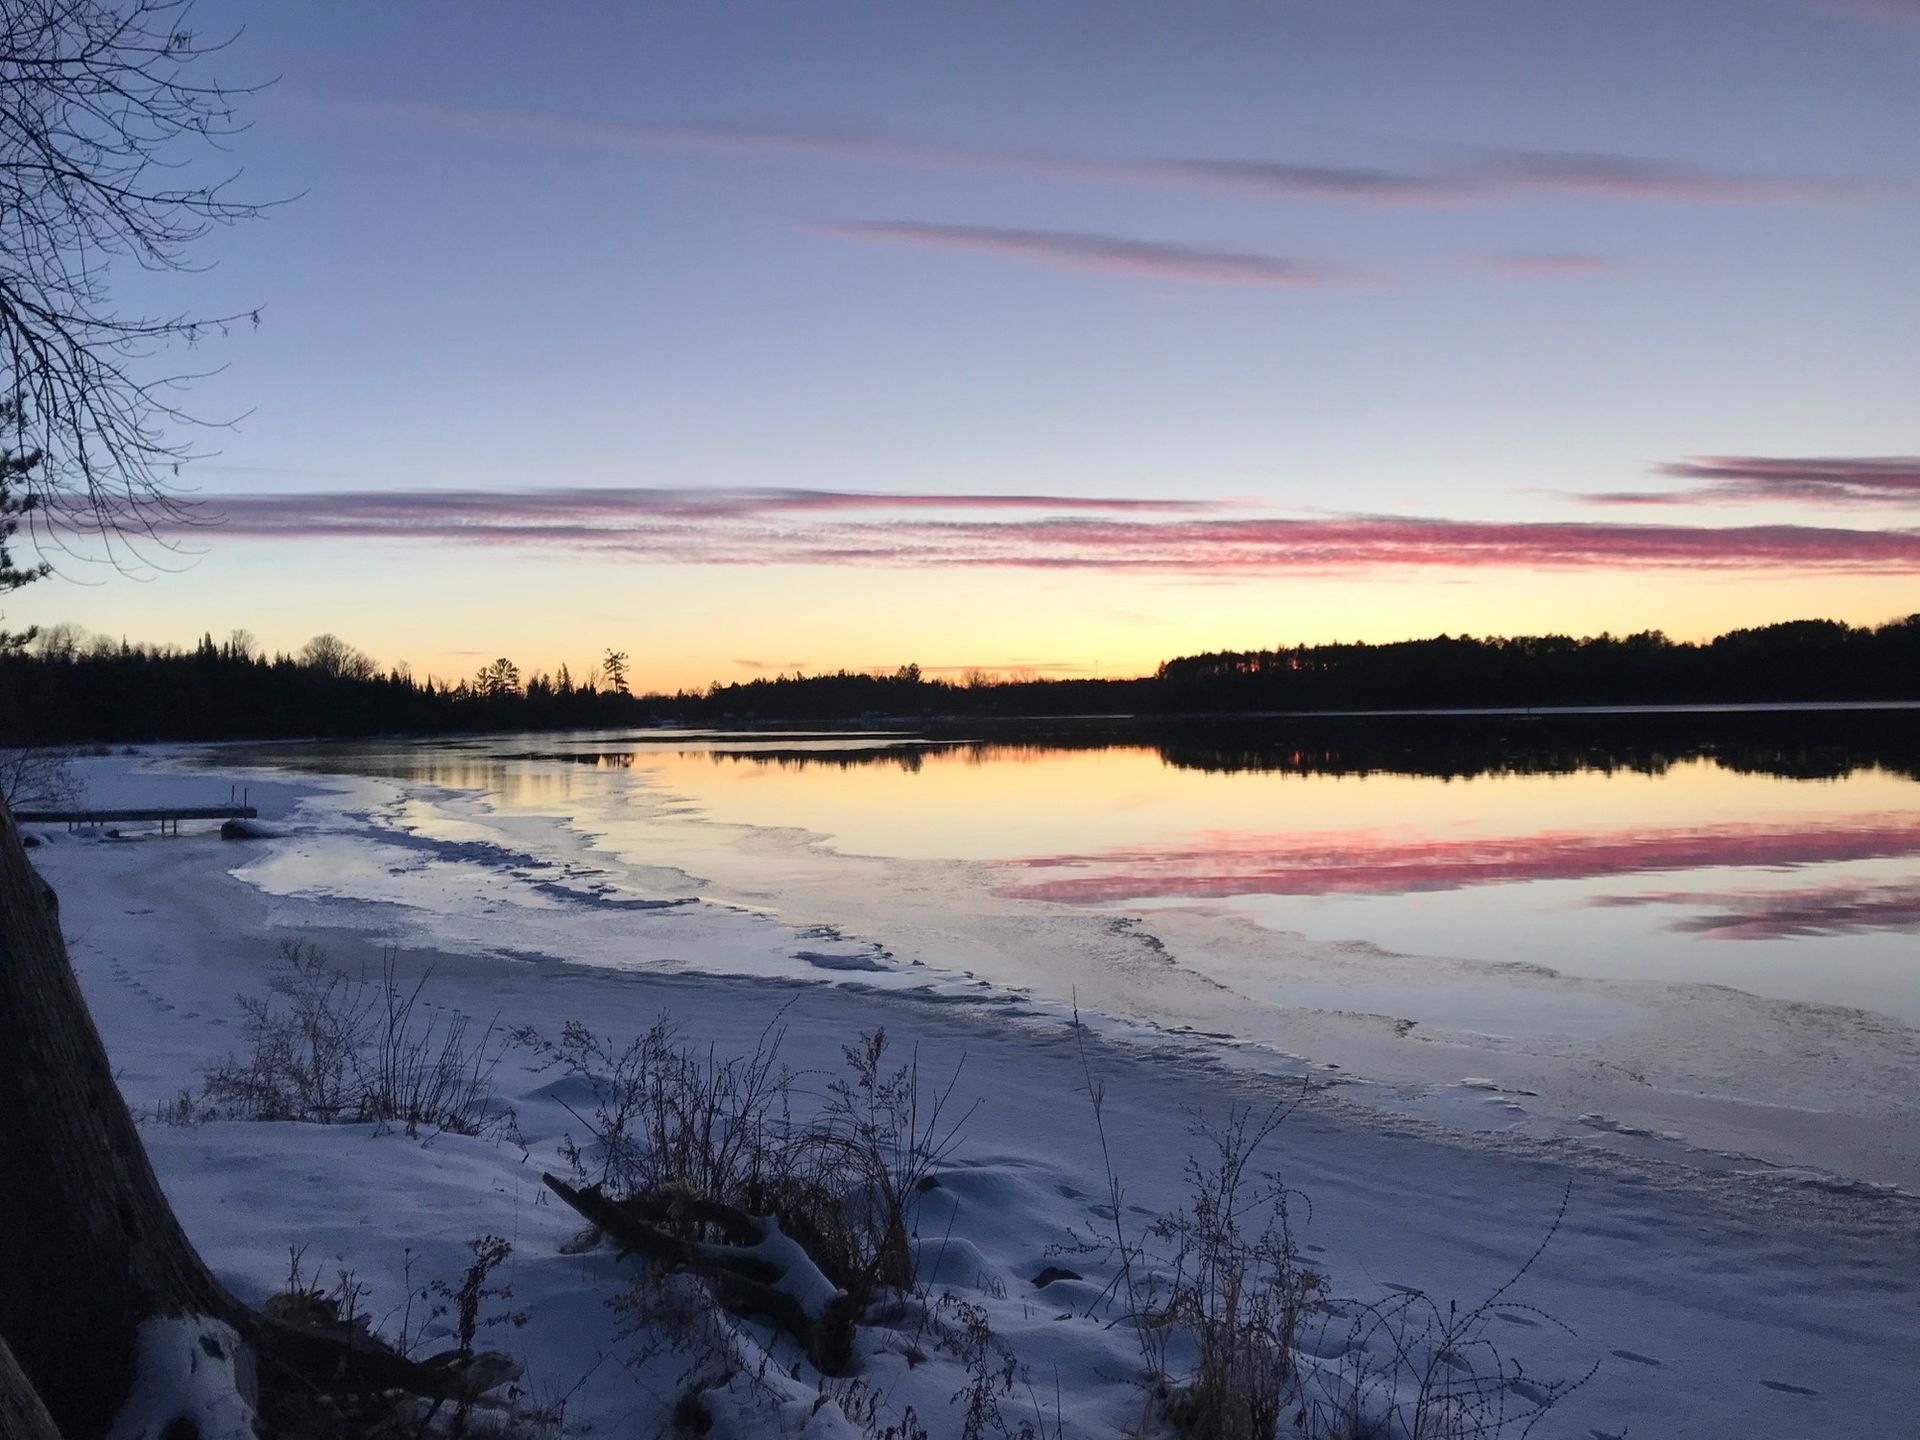 A sunset over a lake with snow on the shore